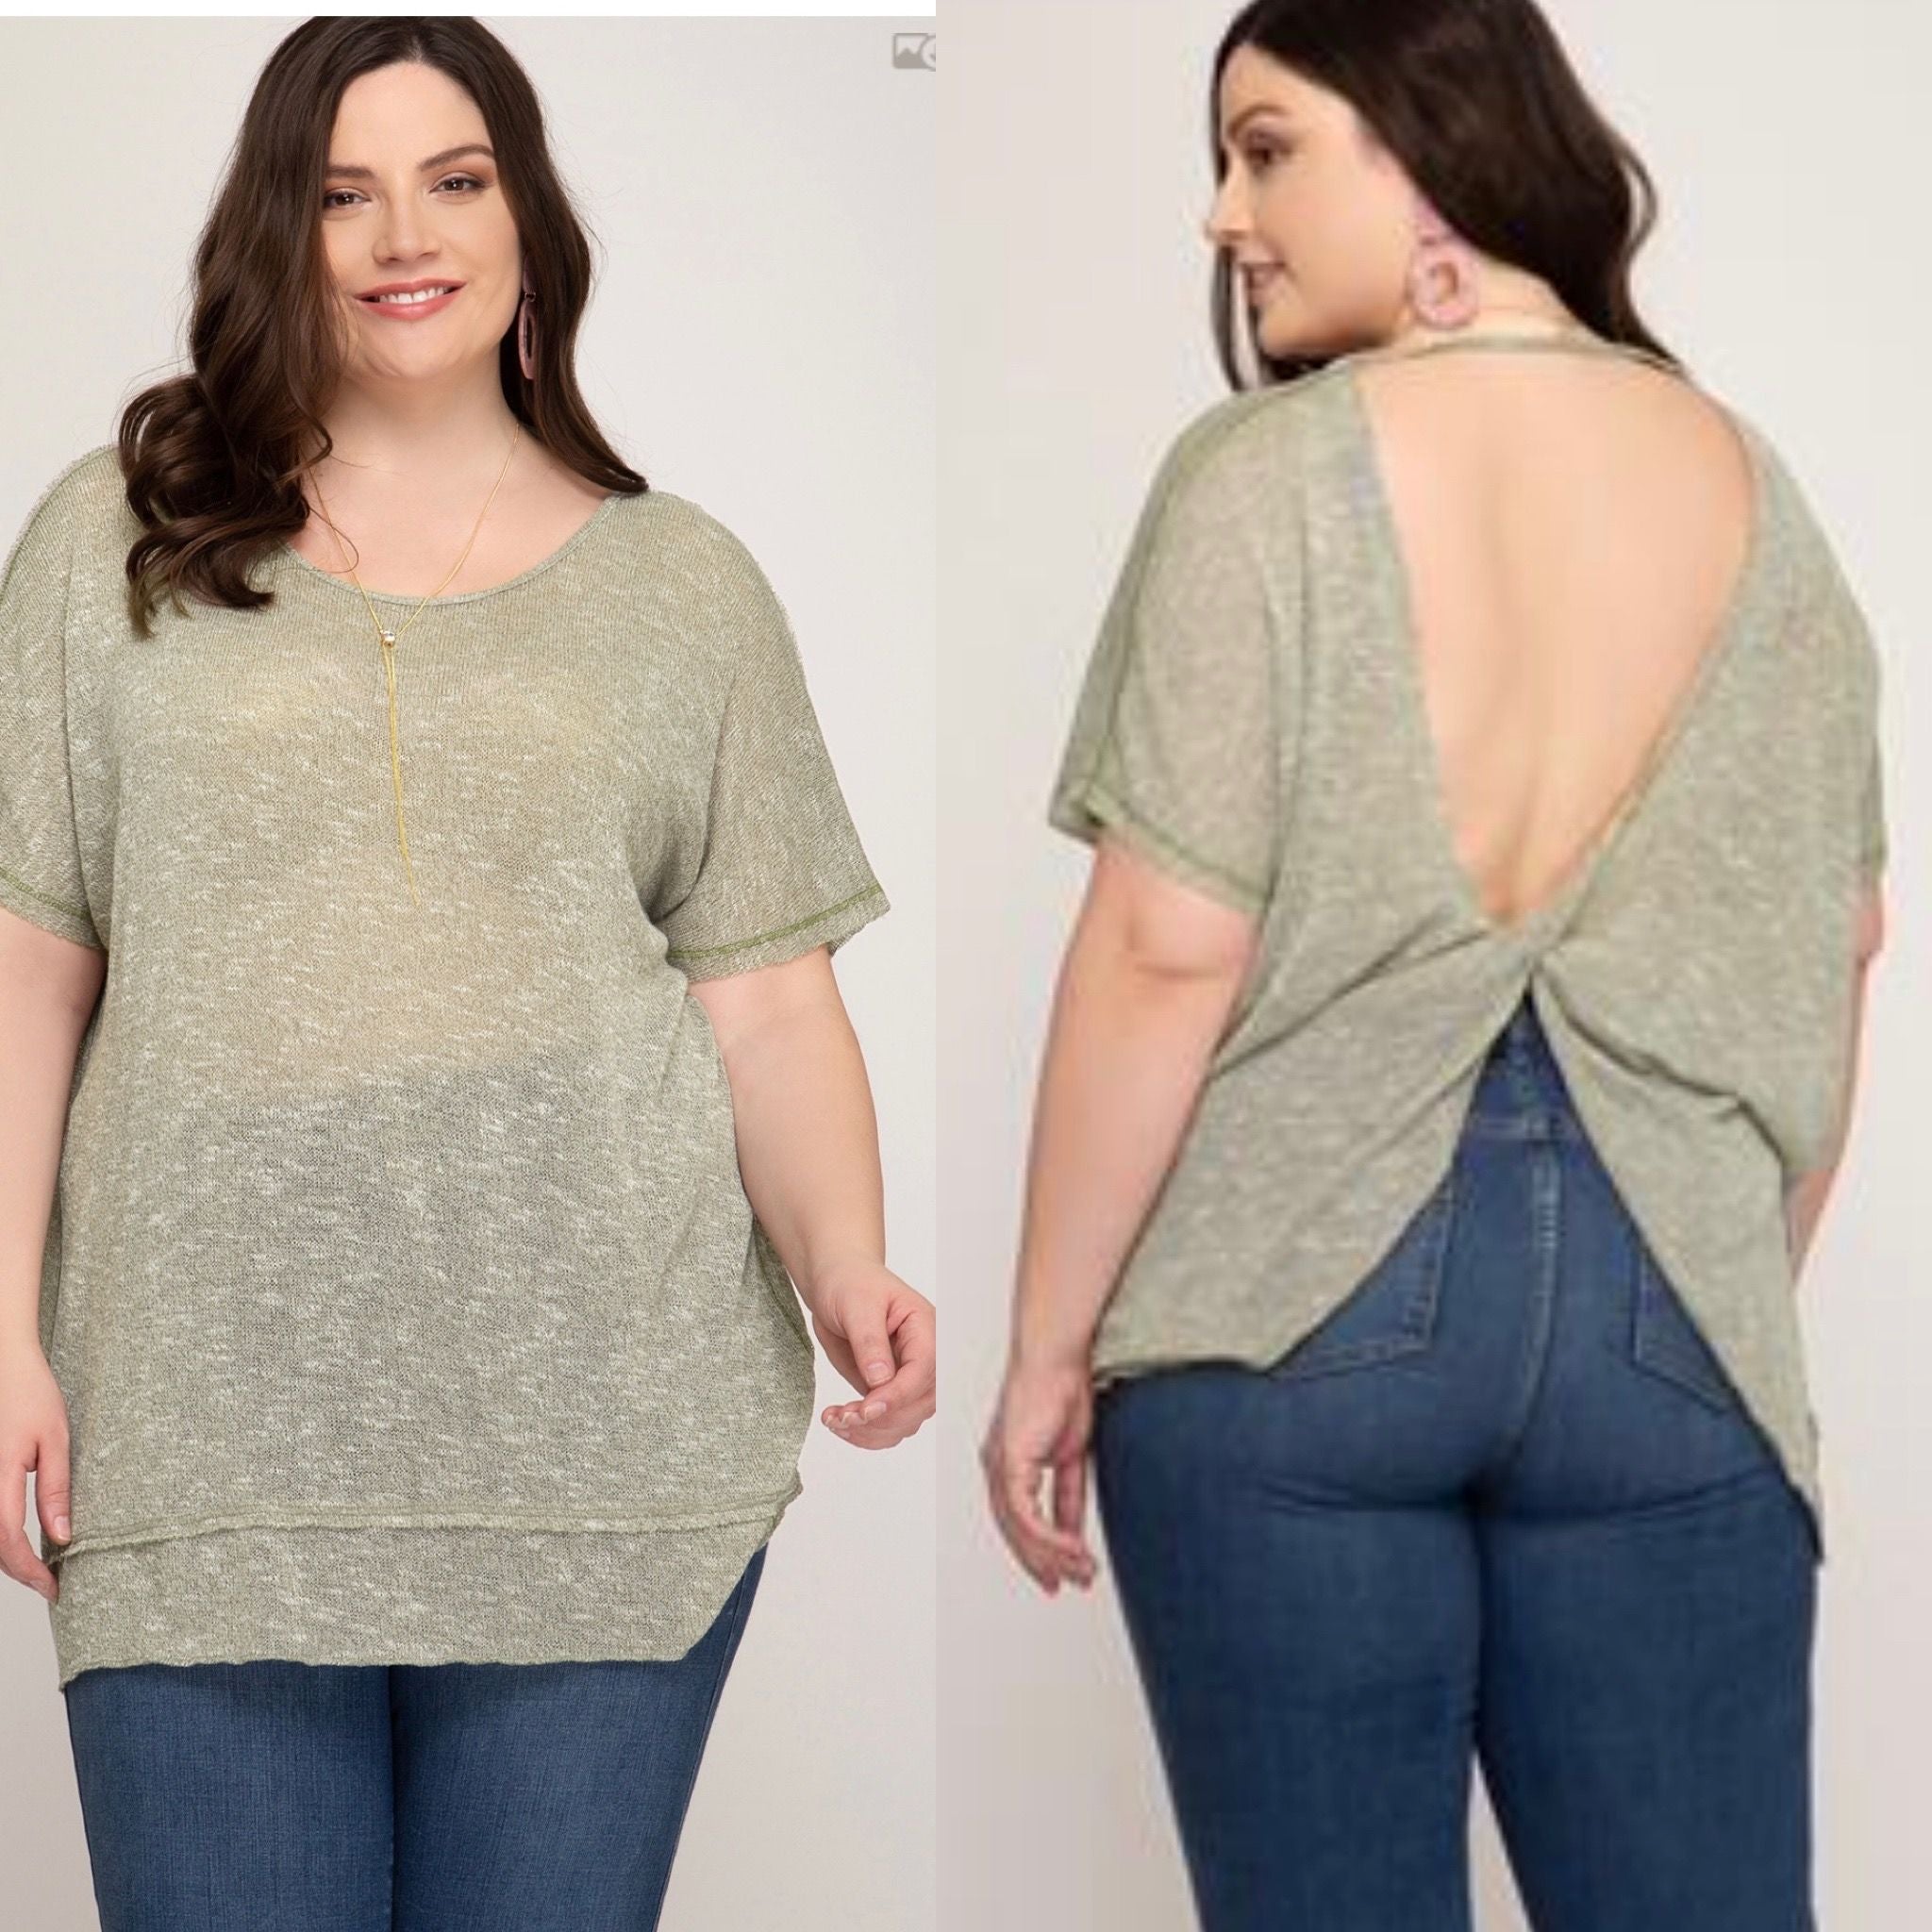 The Olive Plus Sized Top